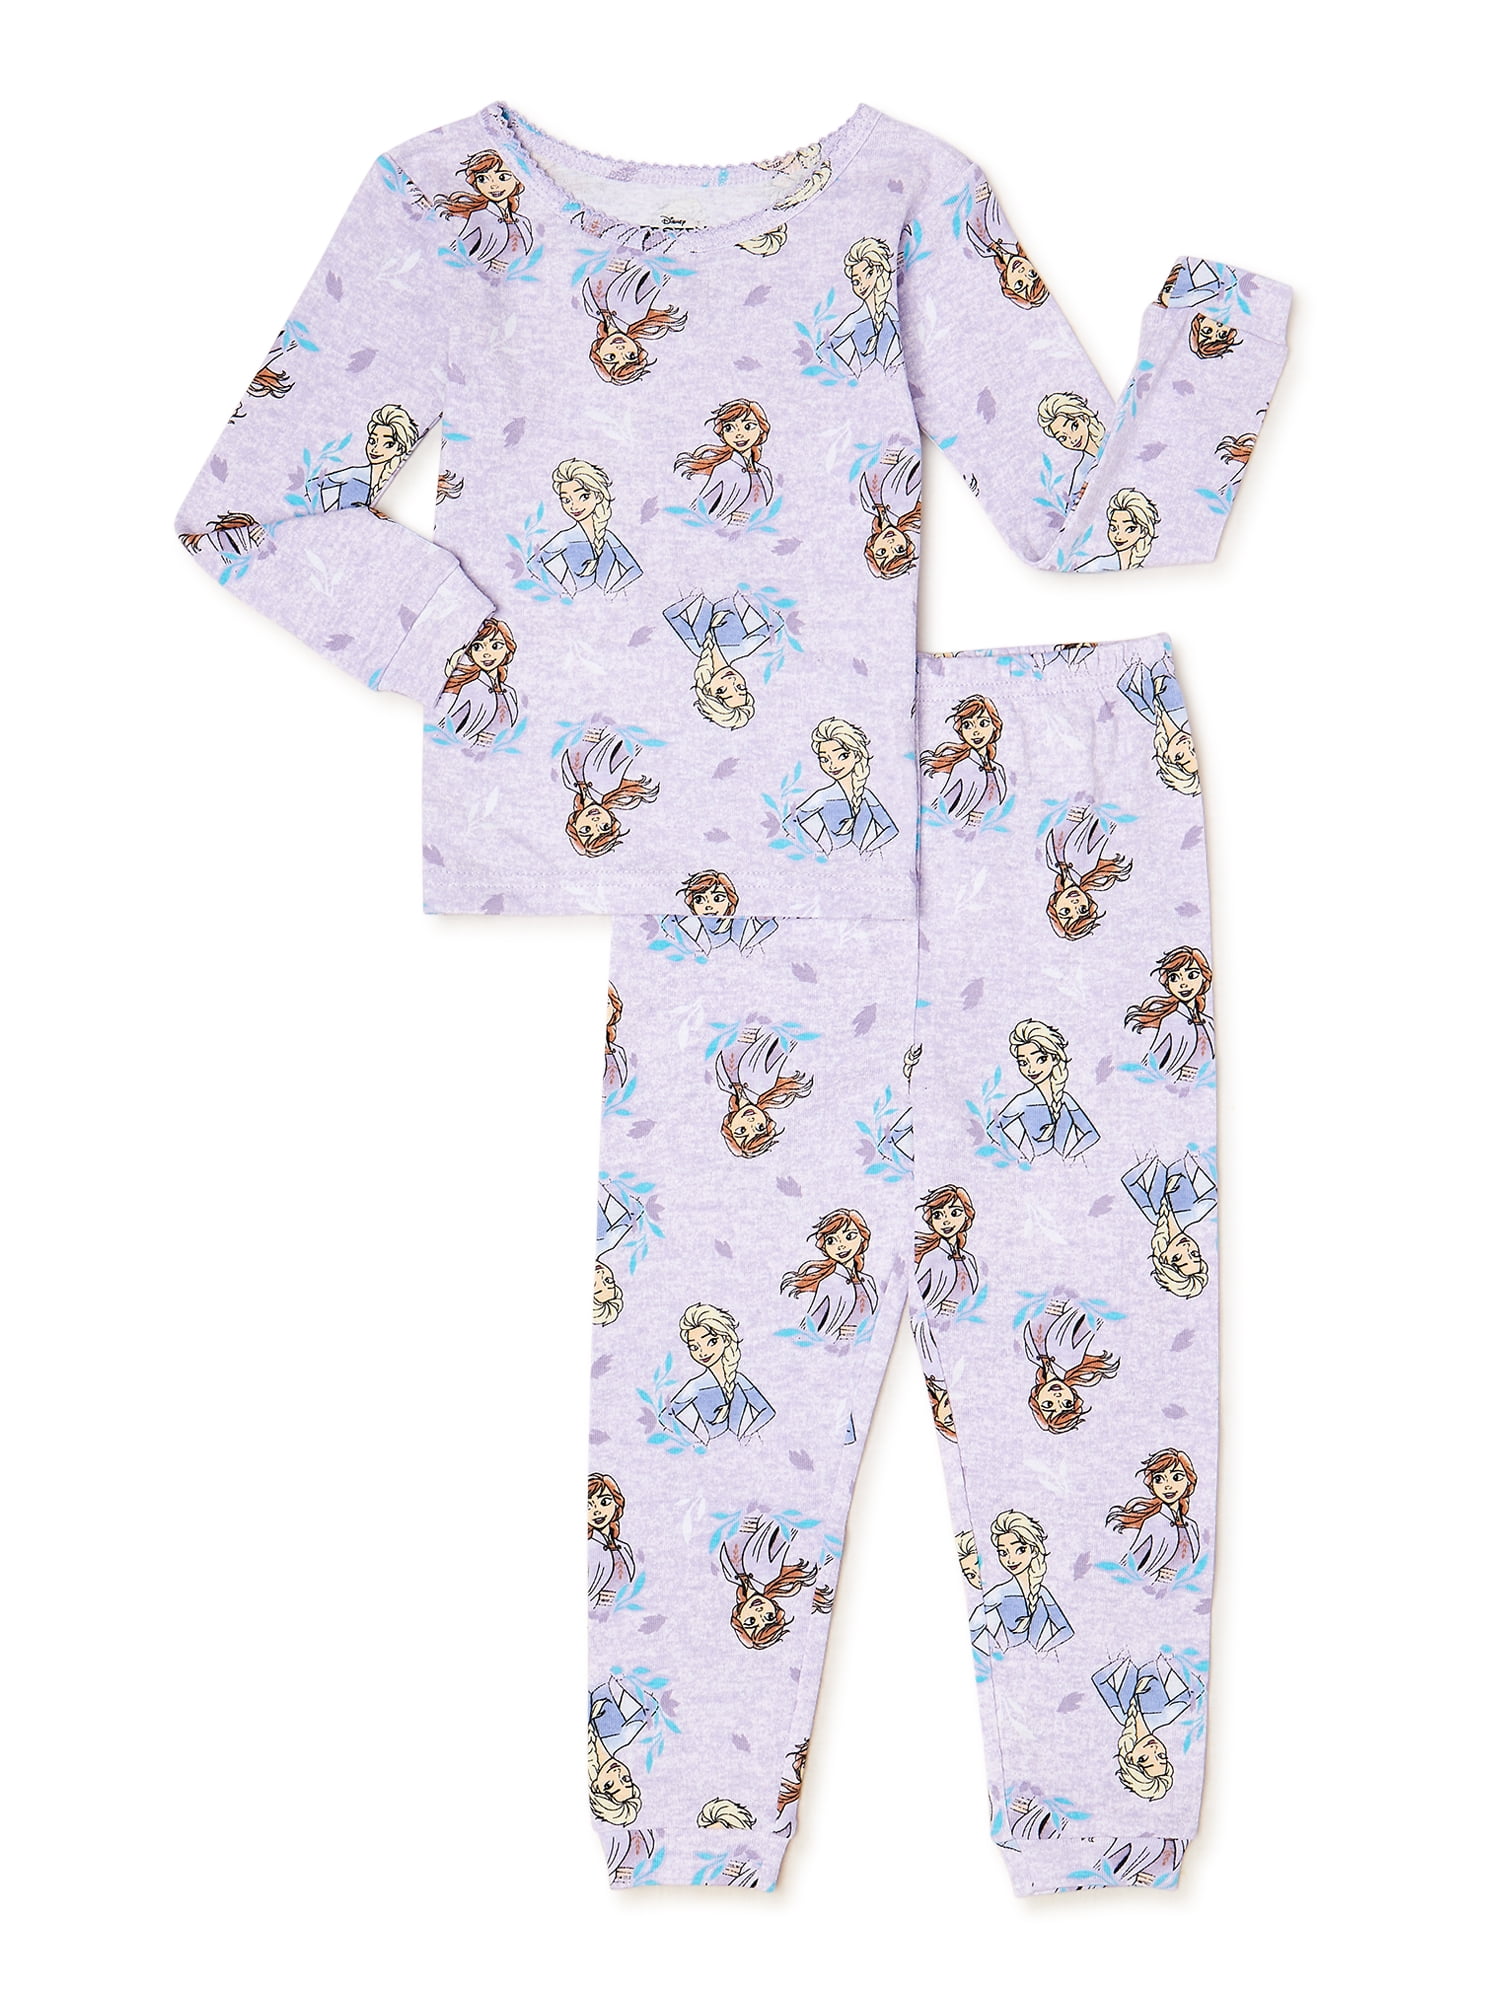 Disney Frozen Character Long Sleeve Top and Pants, 2-Piece Pajamas Set, Sizes 2T-5 T